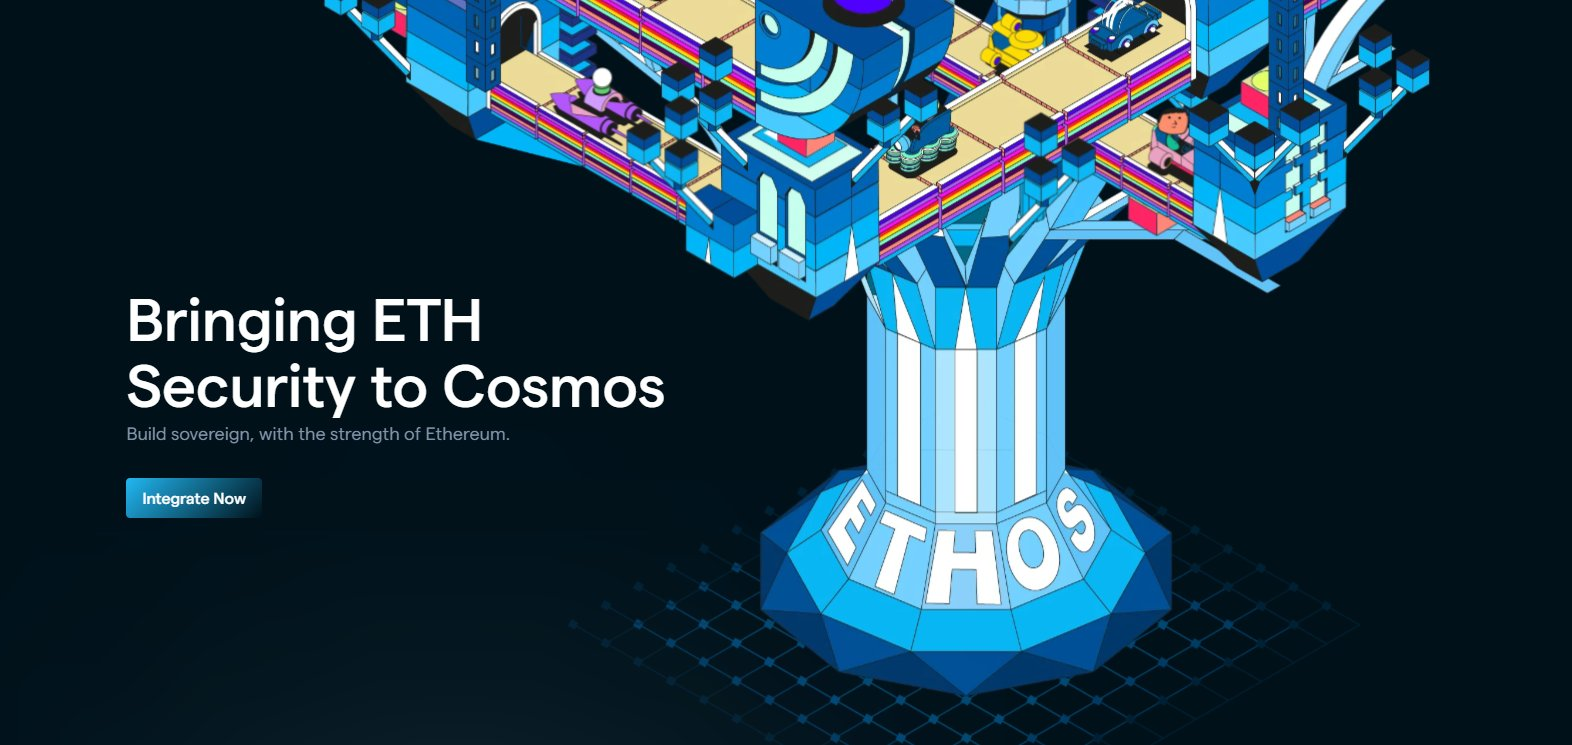 In a similar manner to Babylon chain’s distribution of Bitcoin economic security to Cosmos chains, Ethos pioneered a comparable approach using EigenLayer and Ethereum via the restaking of ETH and its validator-enabled middleware layer. (Image Credit: 100.y.eth via Twitter and the Ethos website)